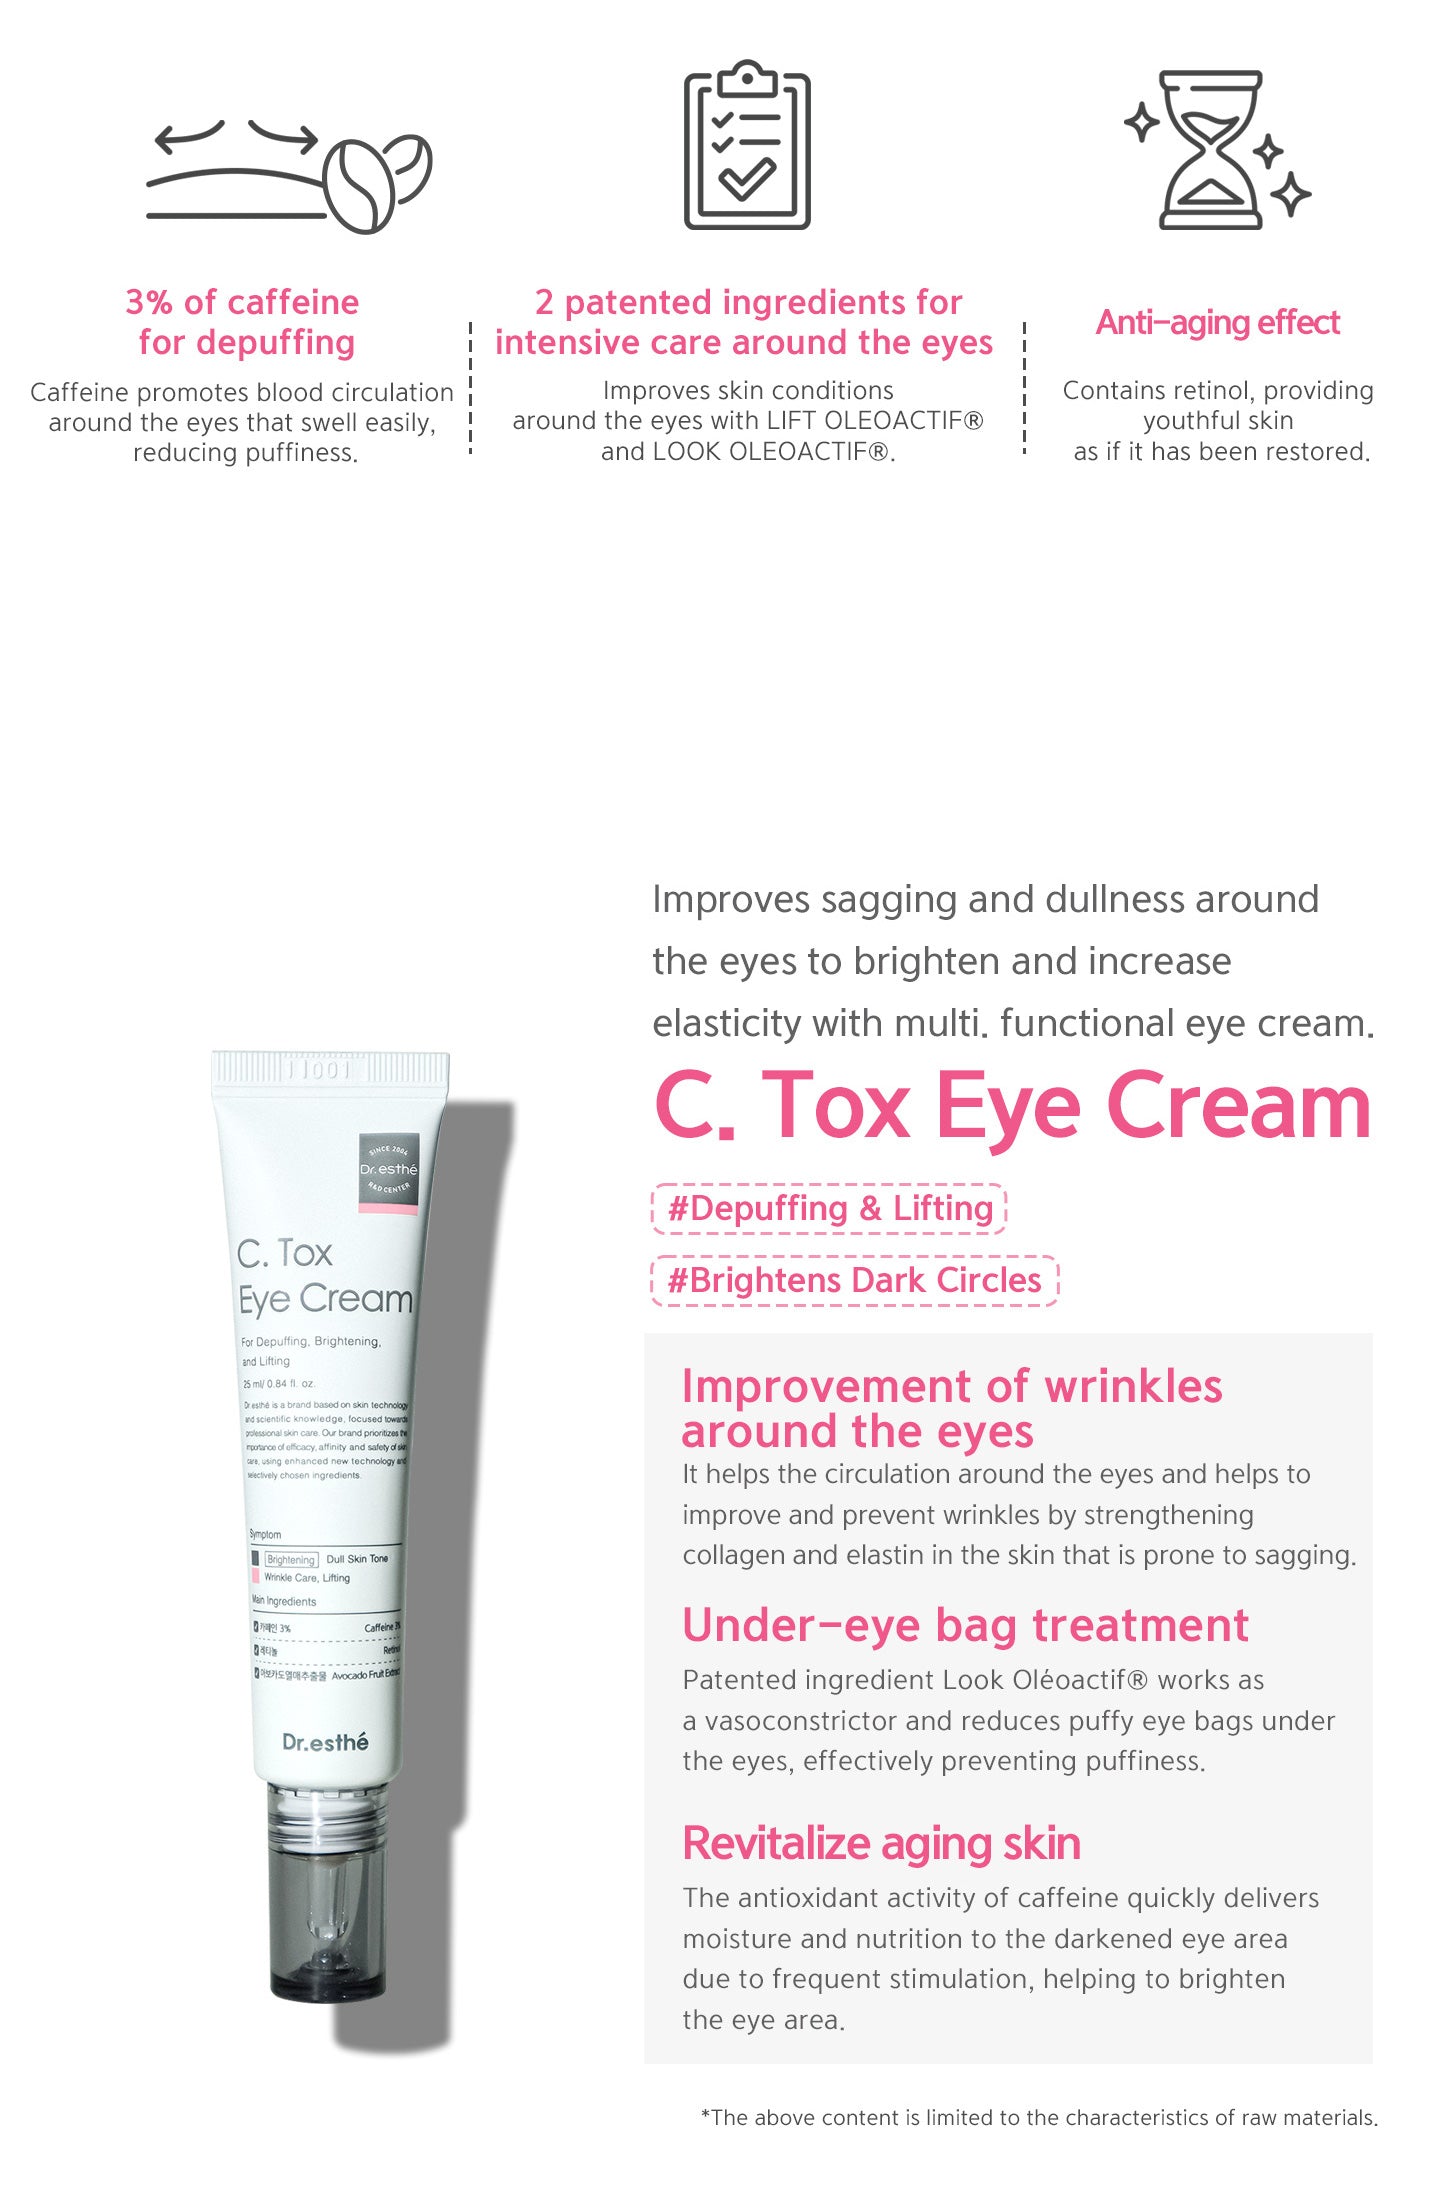 Improve sagging and dullness around the eyes to brighten and increase elasticity with multi-functional eye cream. 3% of caffeine for depuffing. 2 patented ingredients for intensivce care around the eyes. Contains retinol for anti-aging effect.